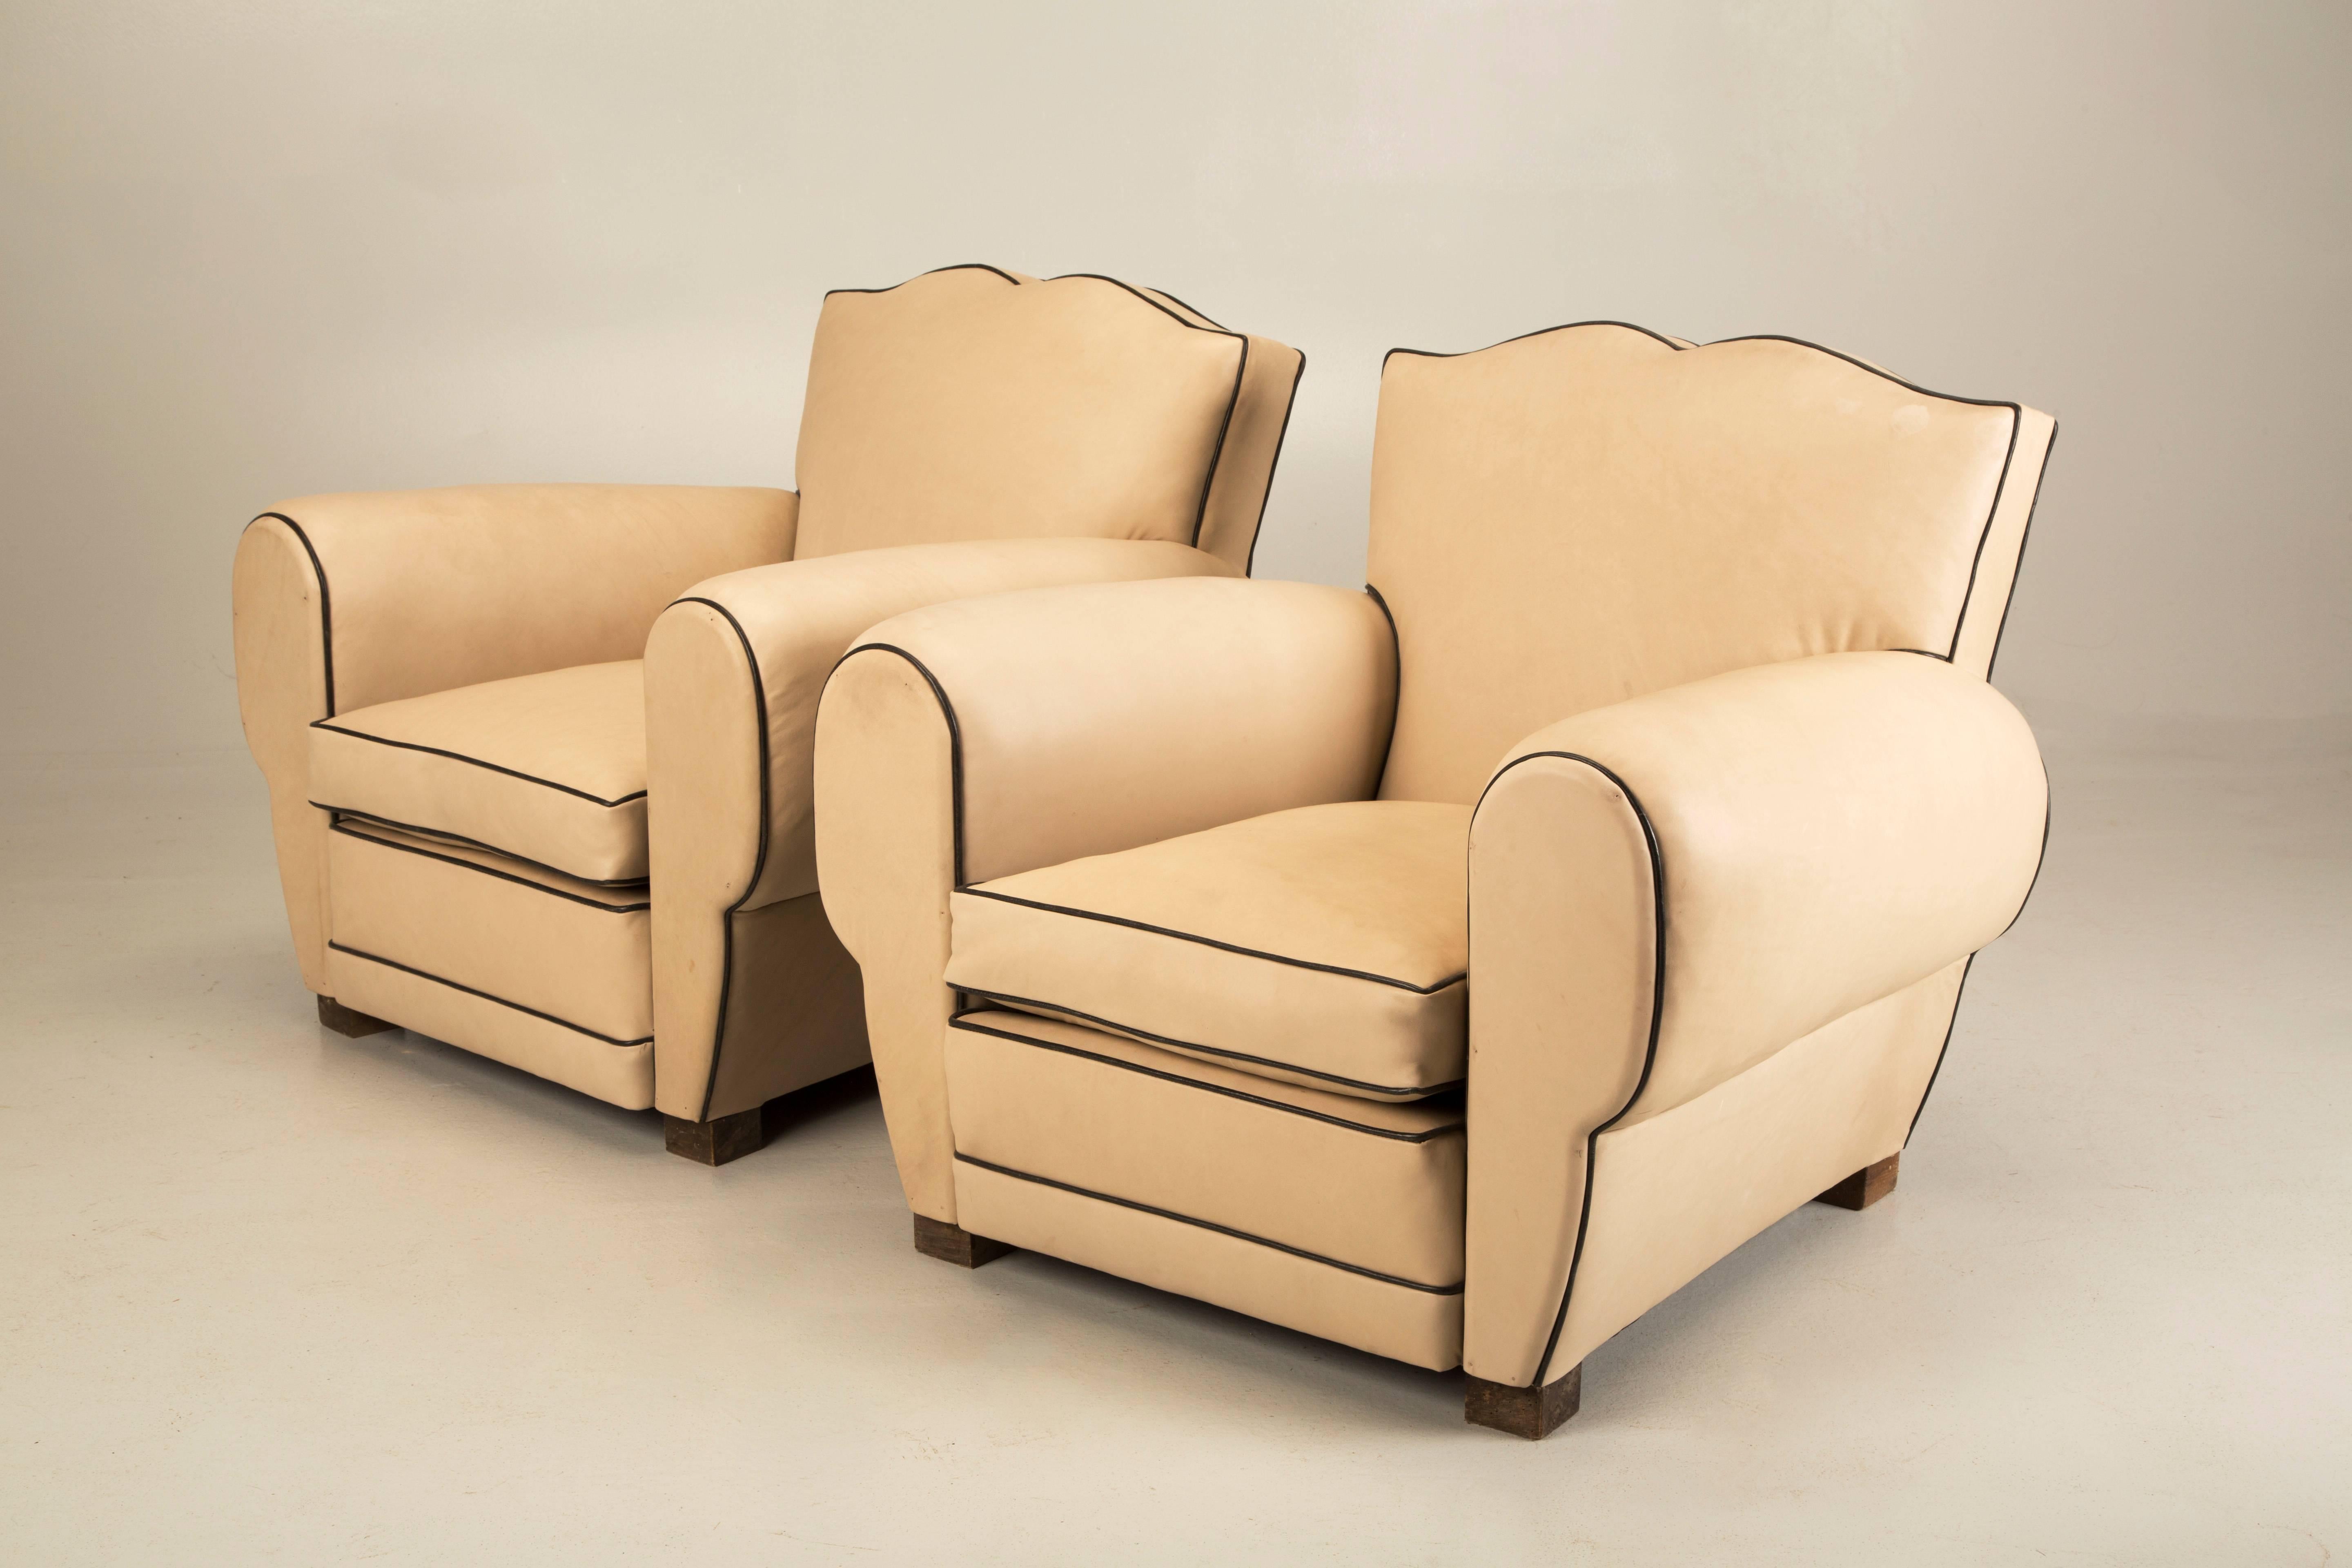 Mid-20th Century French Leather Club Chairs, Completely Restored from the Bare Wooden Frames Up